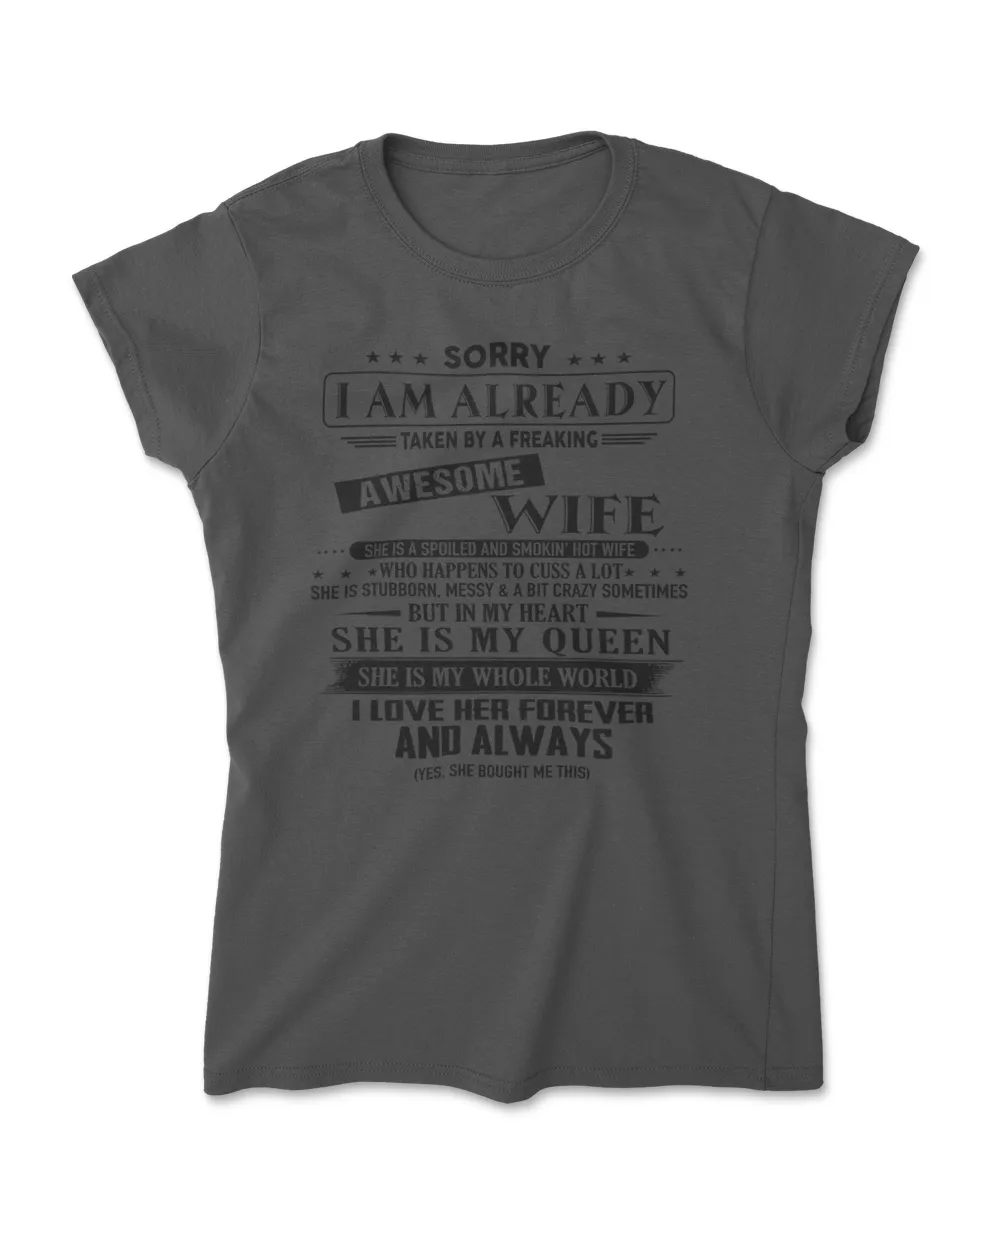 Awesome Wife